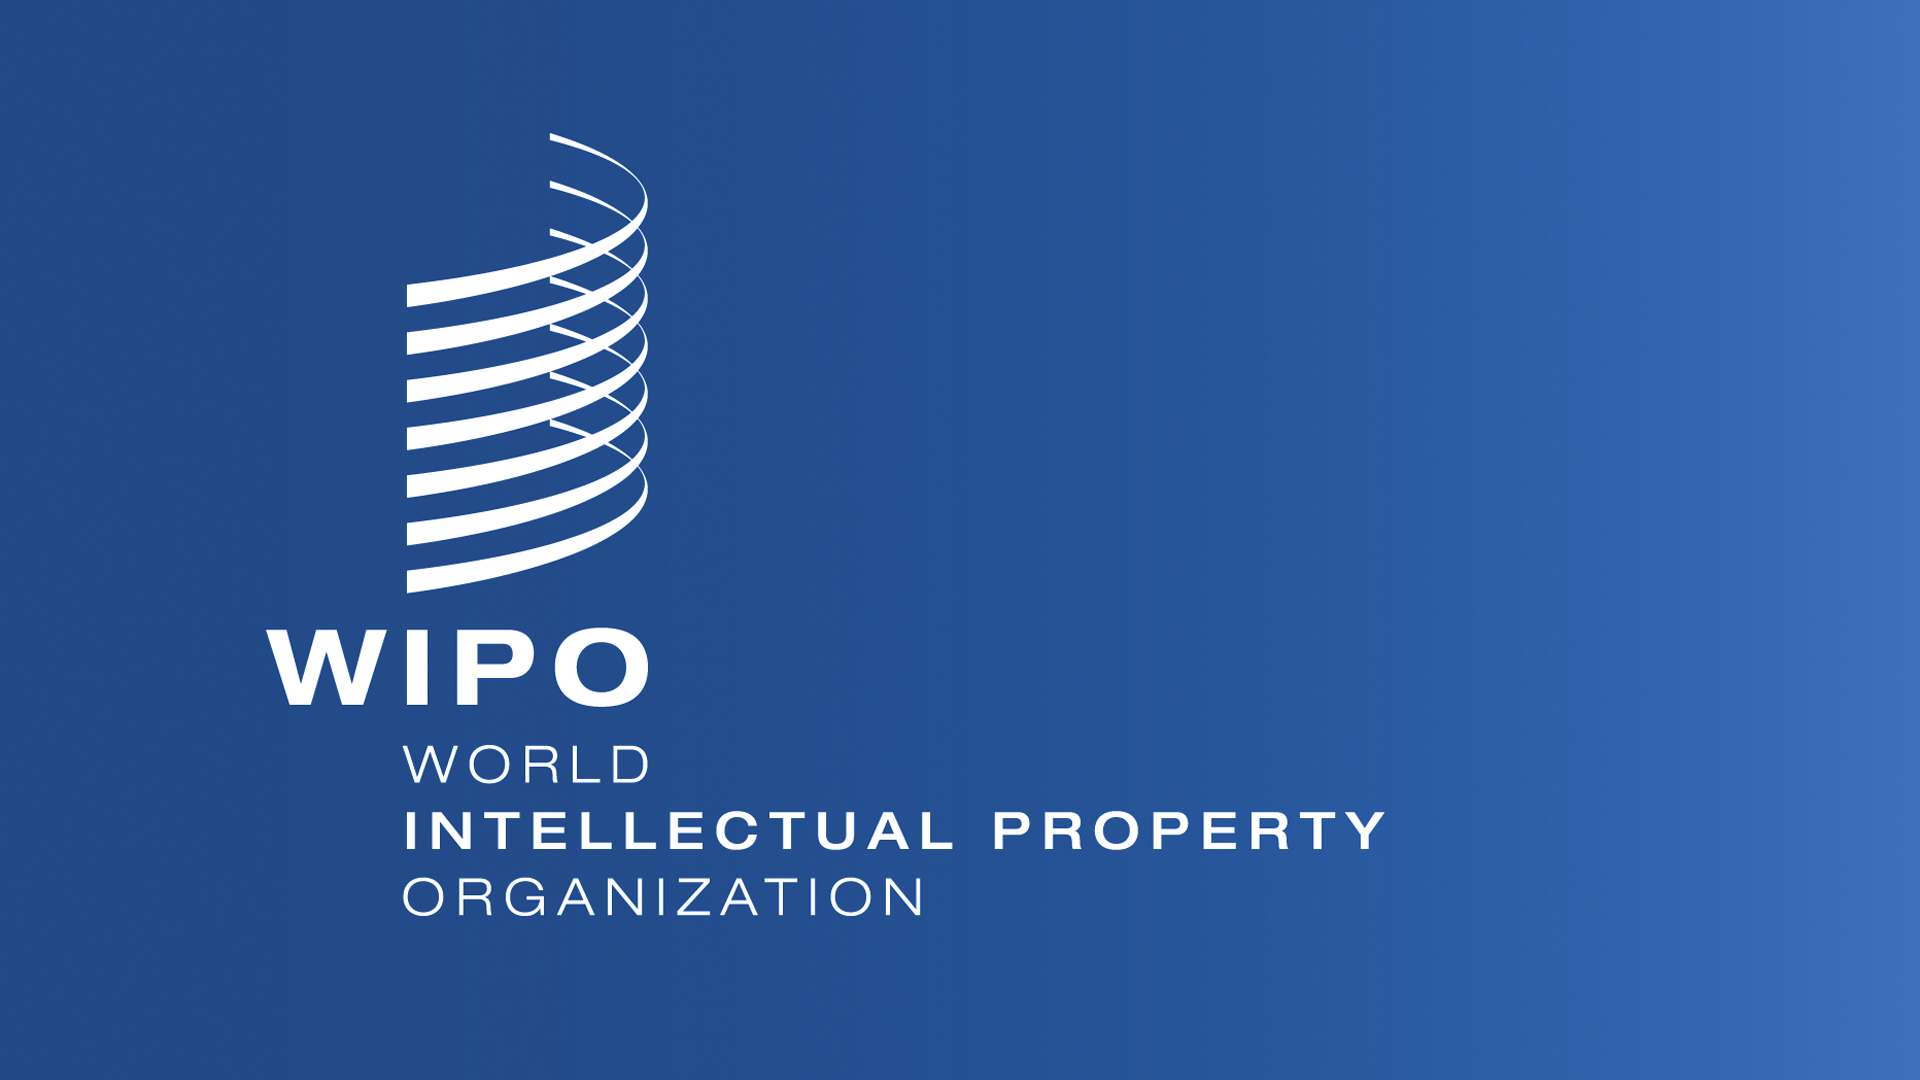 The foundation of the international intellectual property system was laid 140 years ago